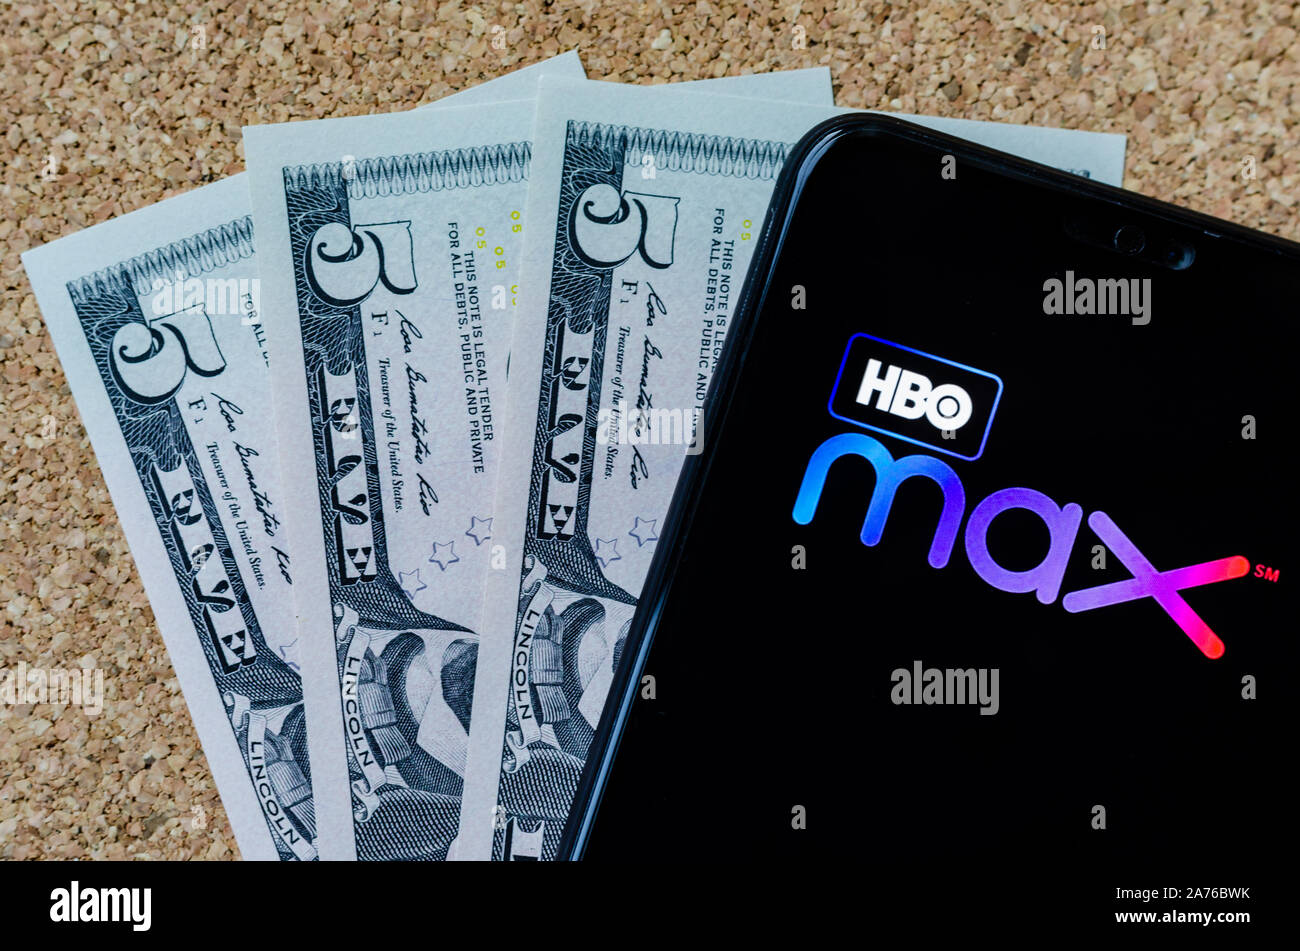 HBO max logo on a smartphone and 15 US dollars next to it, which is monthly fee for a new video streaming service. Stock Photo